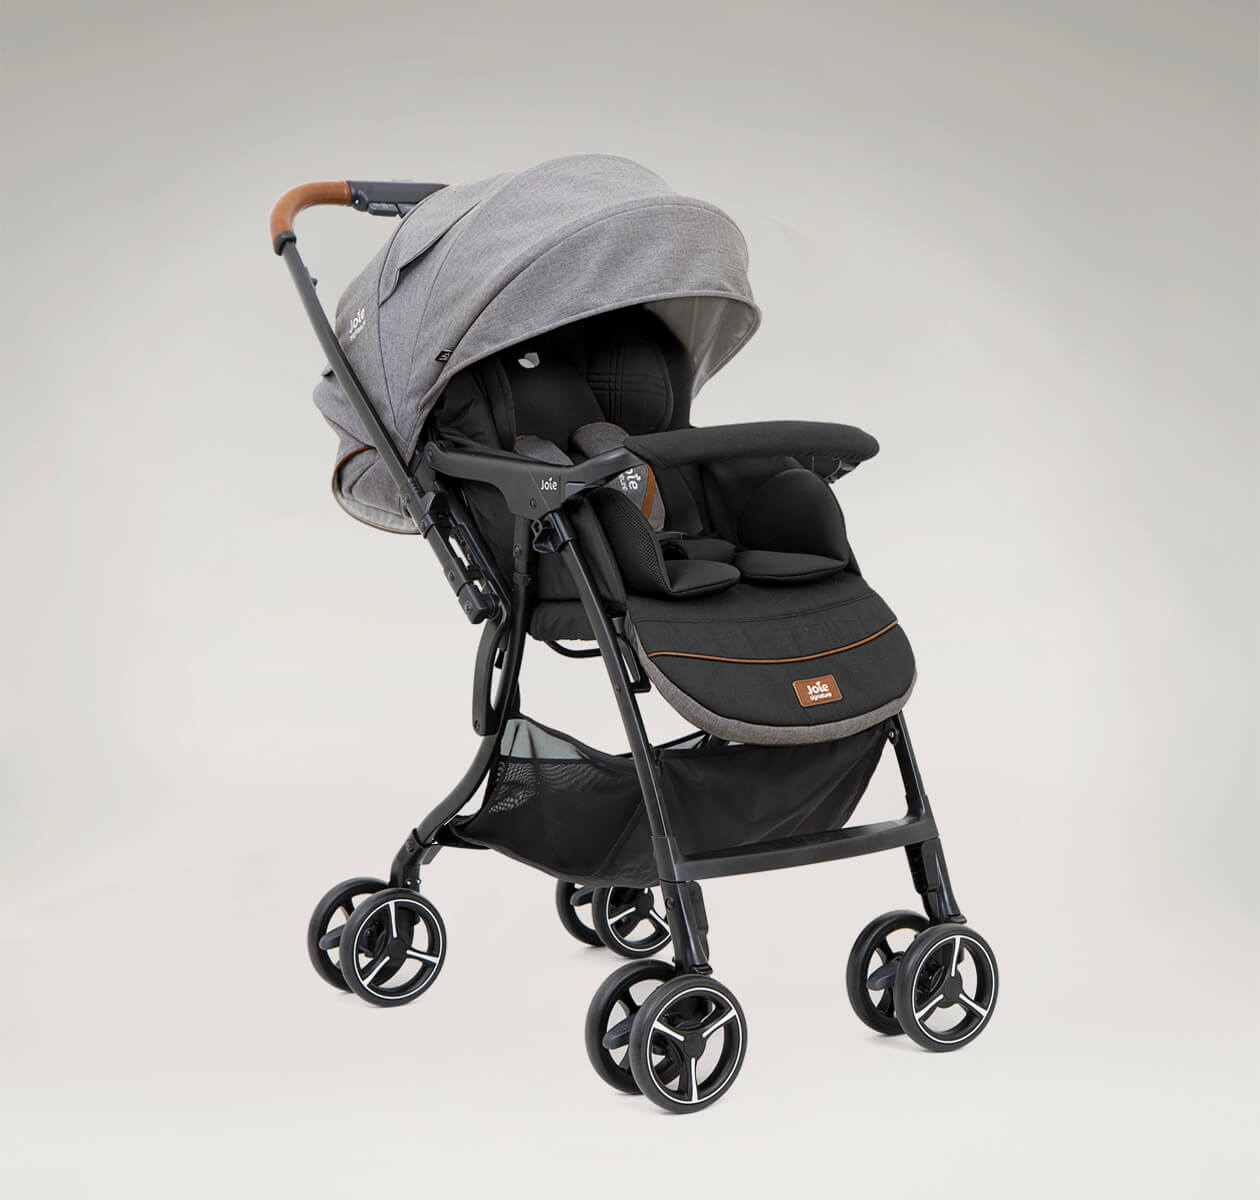 Joie signature stroller sma baggi 4WD drift in black and gray at an angle. 